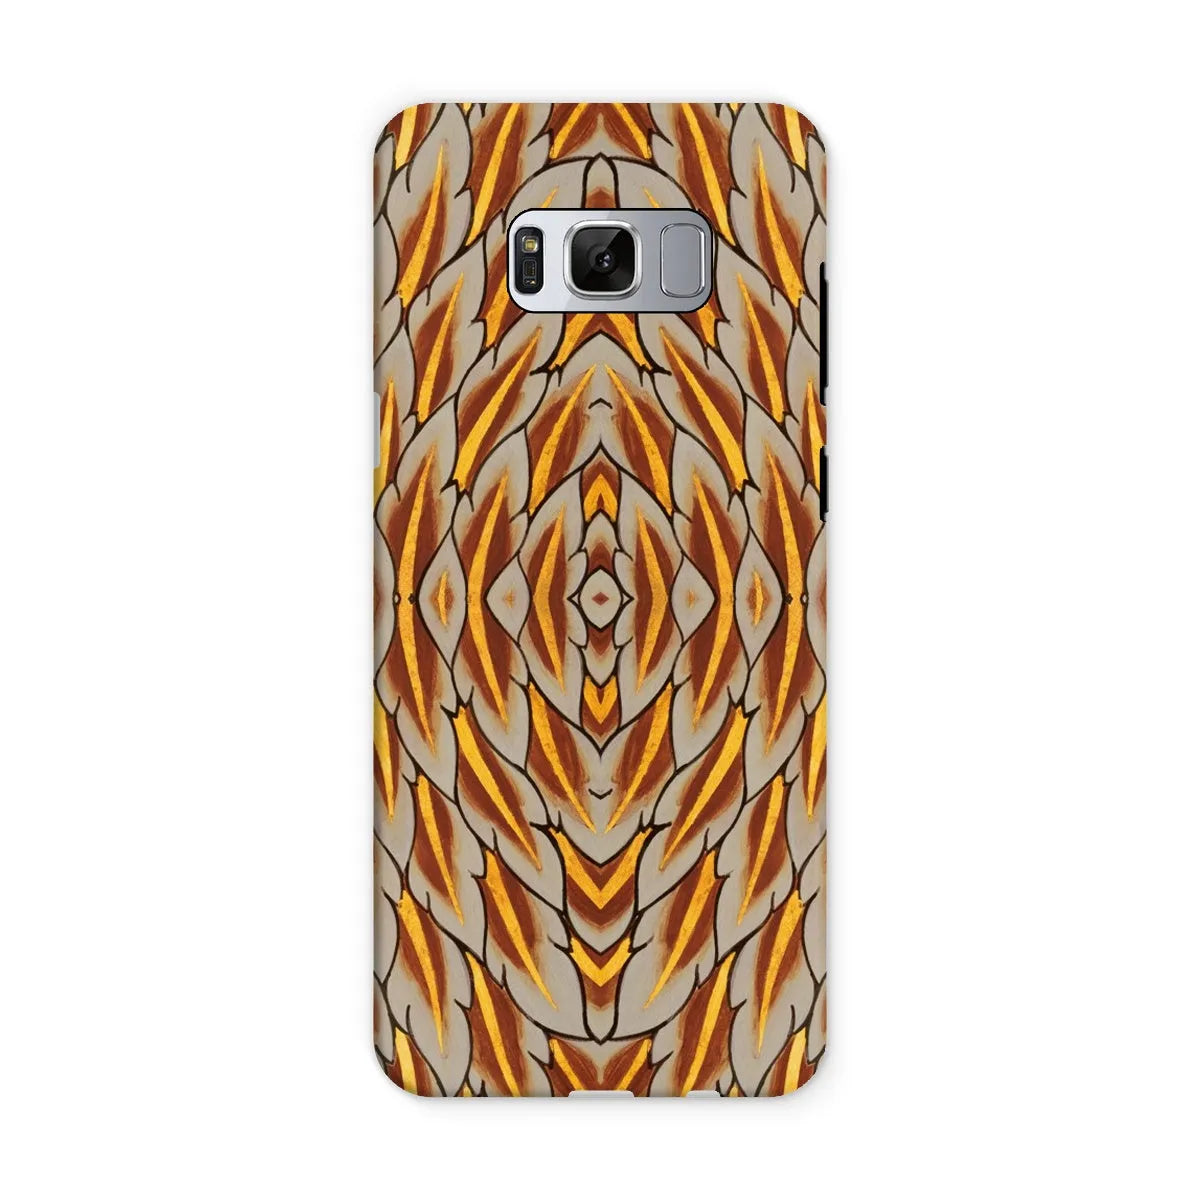 Featherweight Champion Thai Aesthetic Art Phone Case - Samsung Galaxy S8 / Matte - Mobile Phone Cases - Aesthetic Art